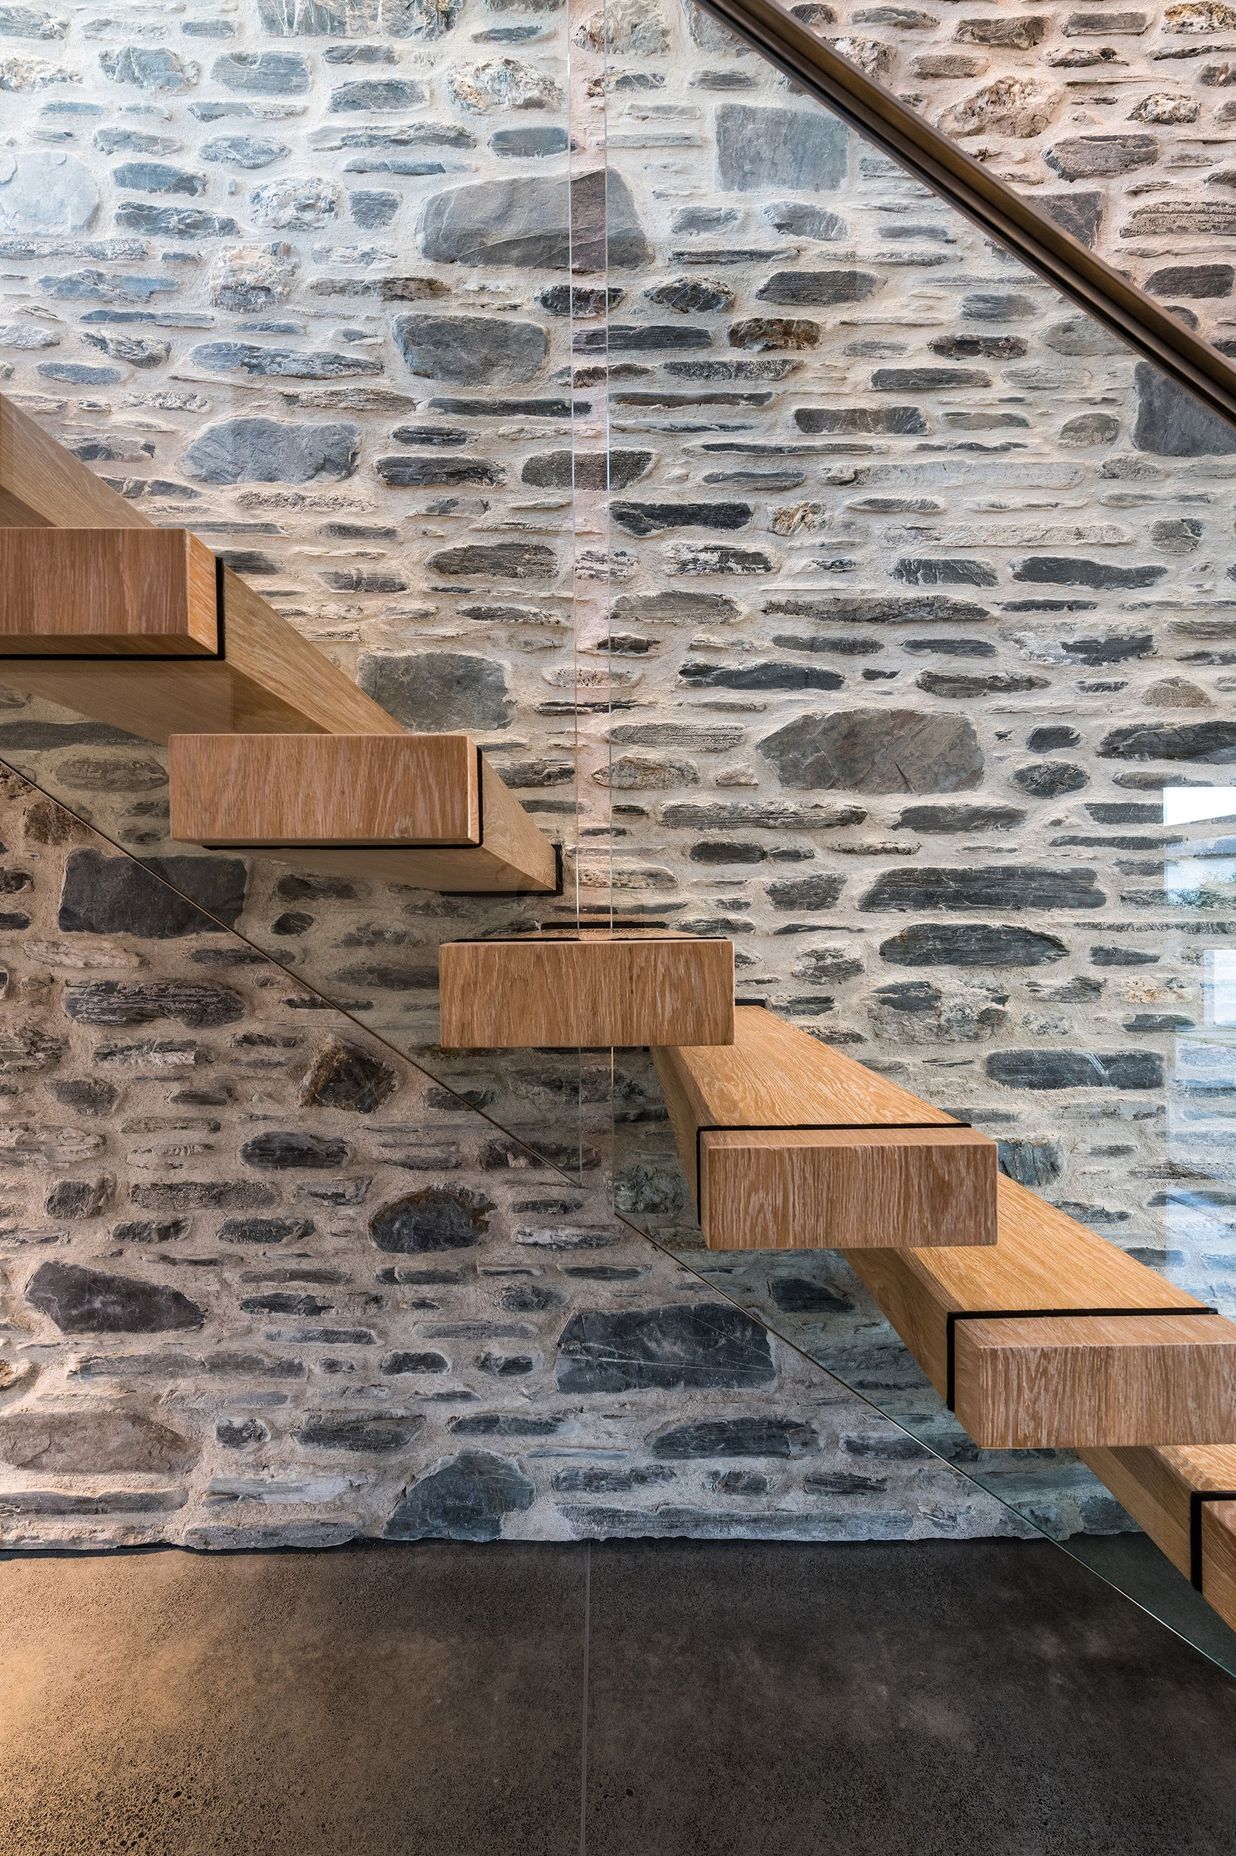 American oak stair treads add warmth against the stone and concrete.